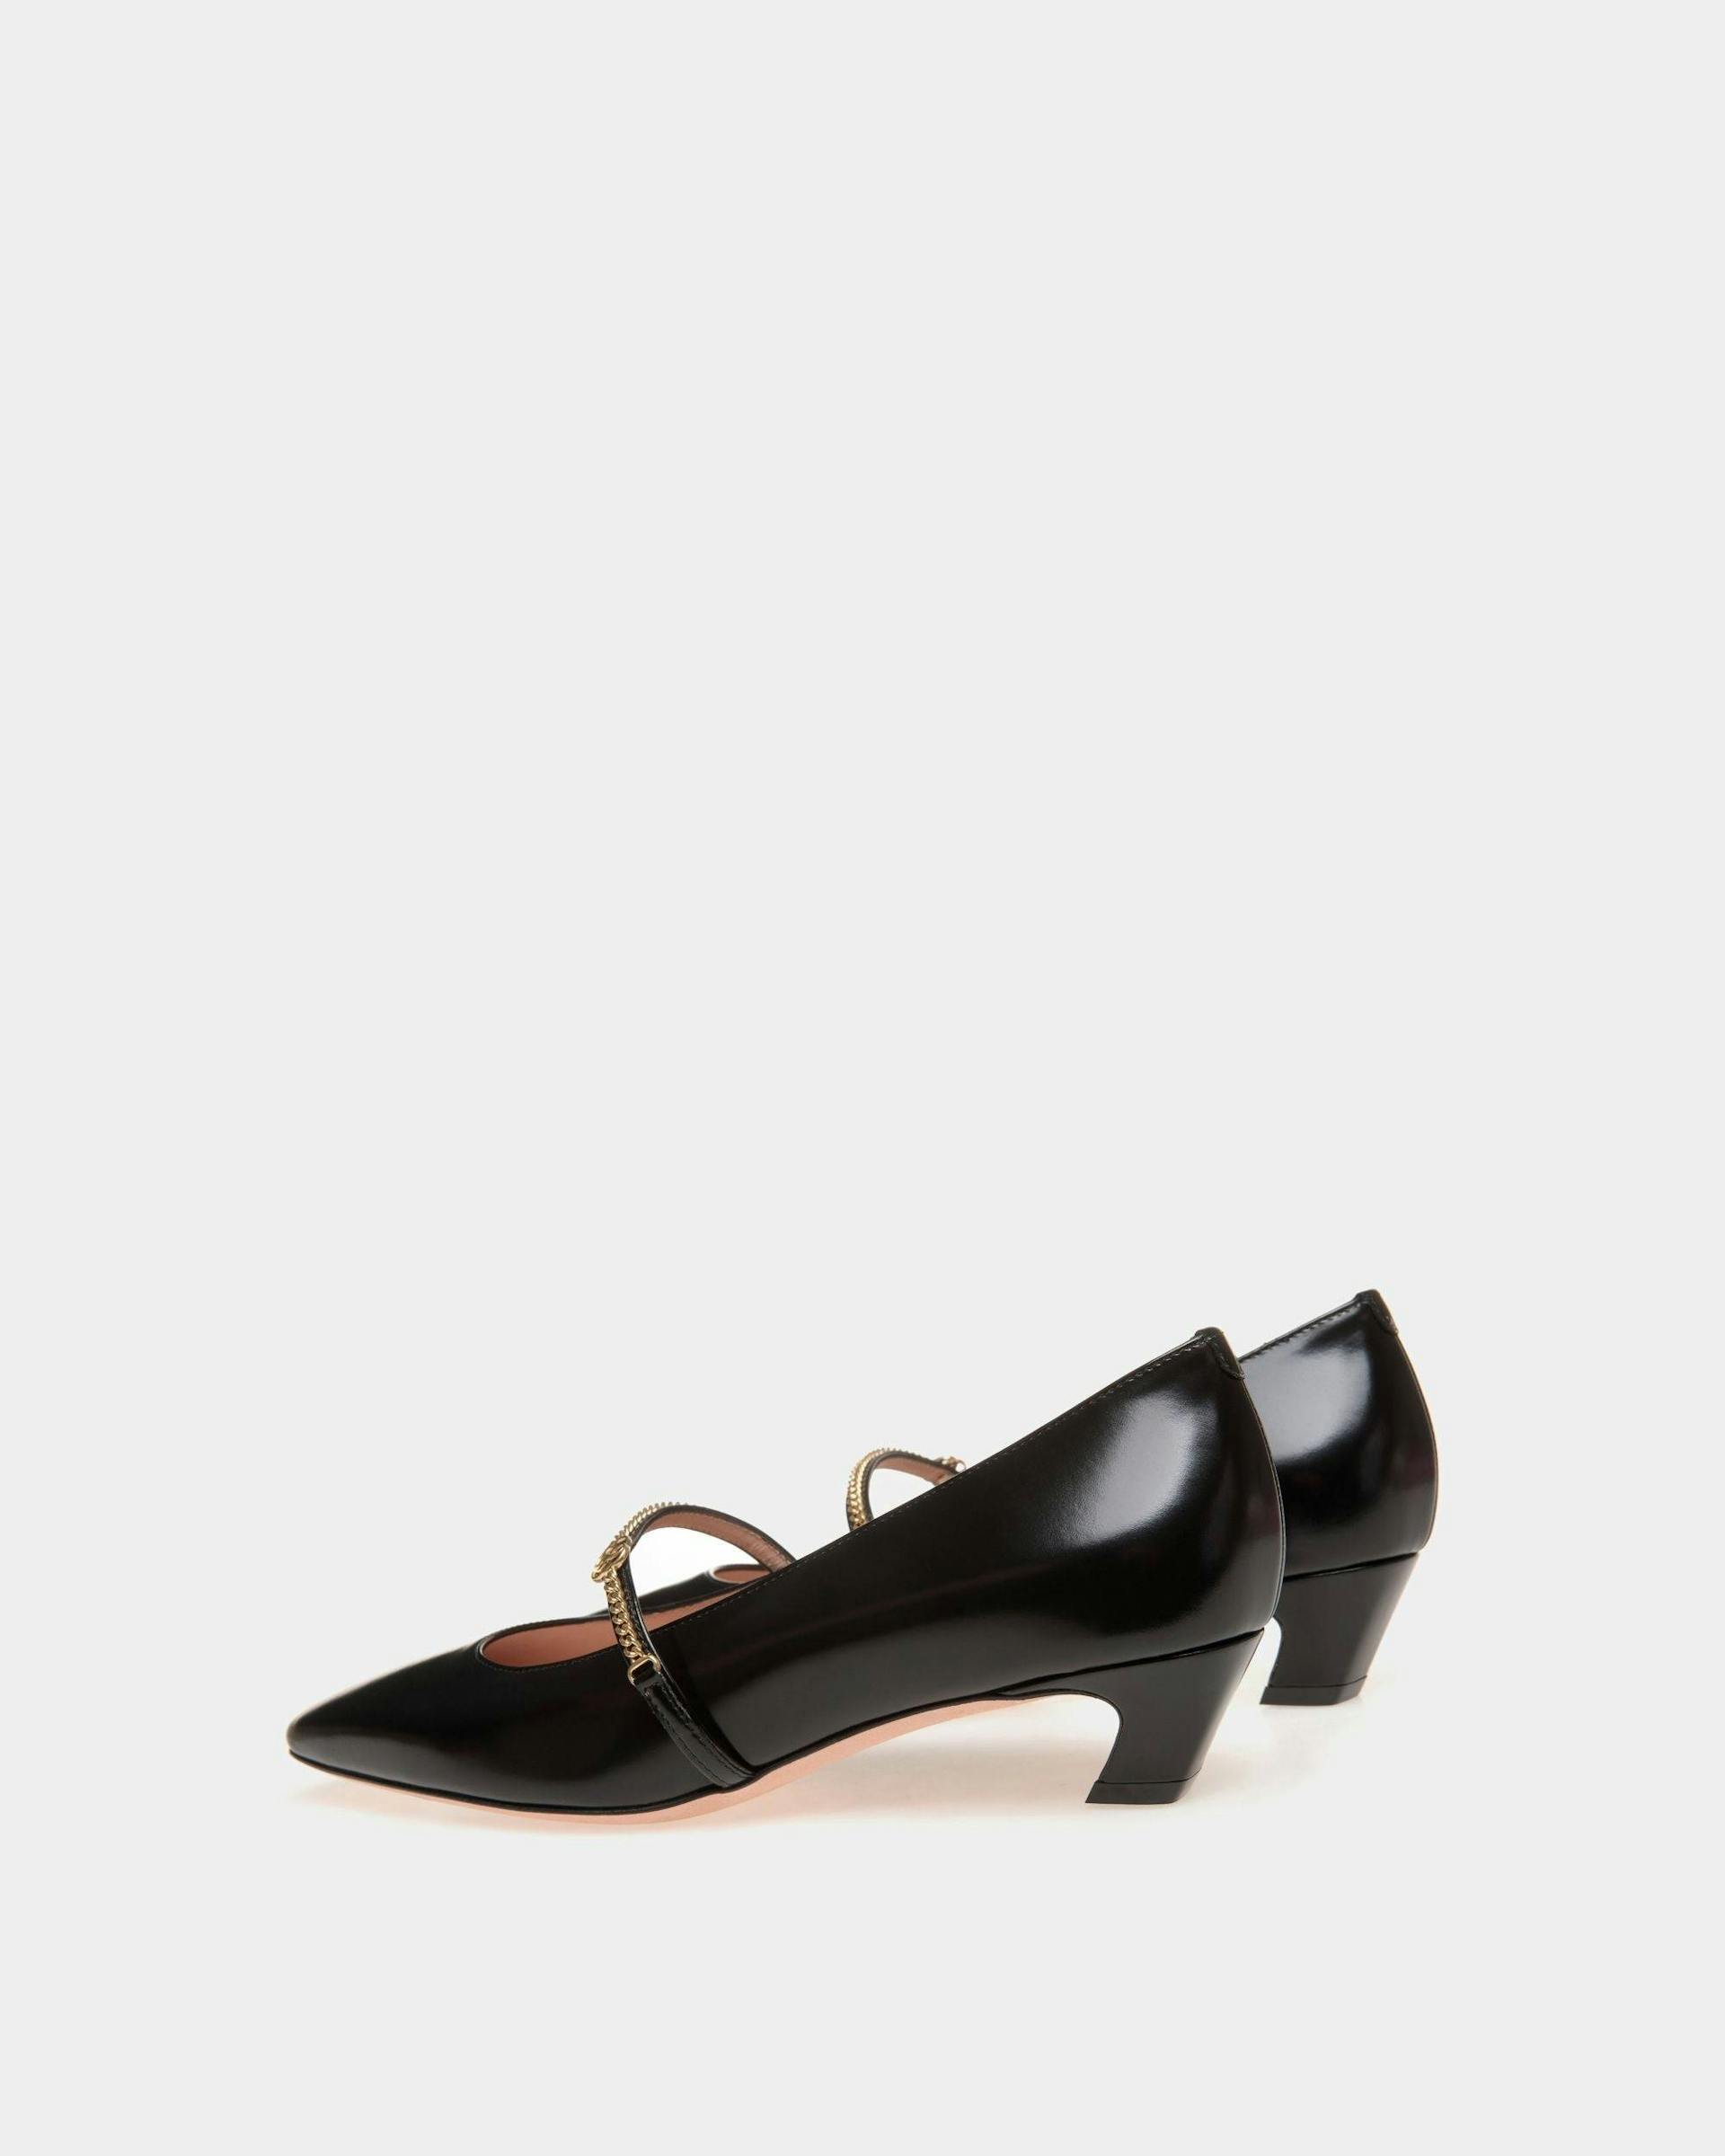 Women's Sylt Mary-Jane Pump In Black Leather | Bally | Still Life 3/4 Back